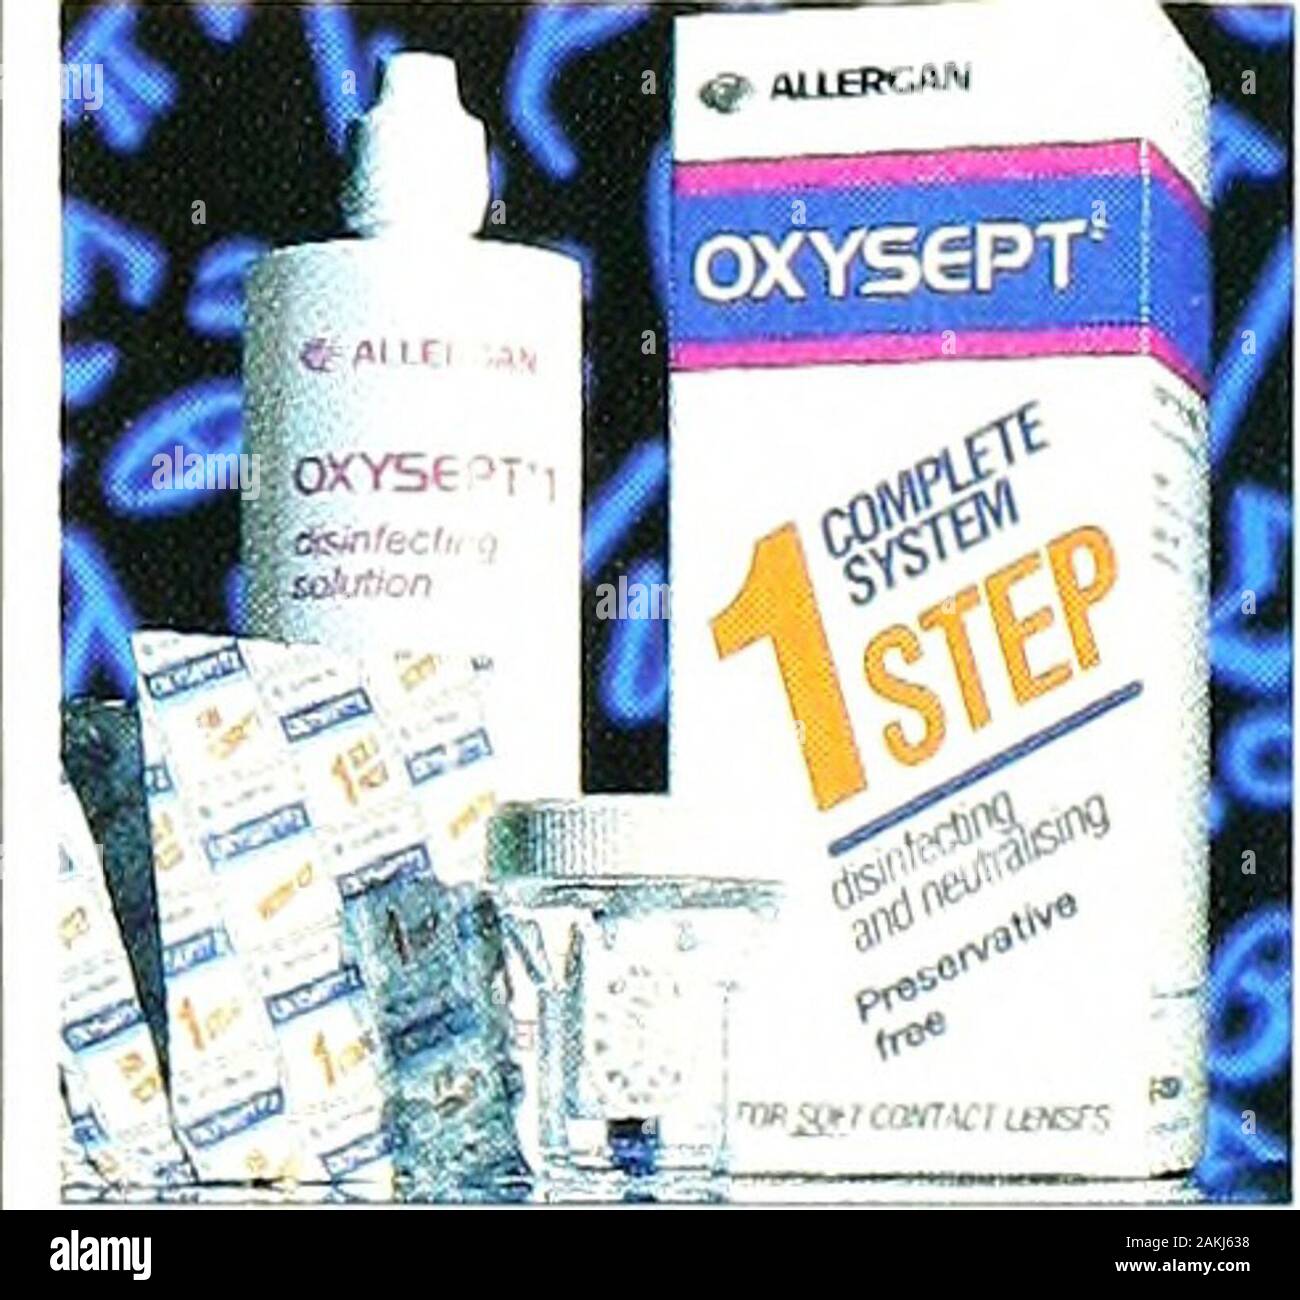 The chemist and druggist [electronic resource] . Allergan get bigwith  Oxysept. Oxysept and Oxysept 1Step are now availablein three-month  packsthrough pharmacies.Originally these packswere only availablefrom  opticians. The packs representsavings of 25 and